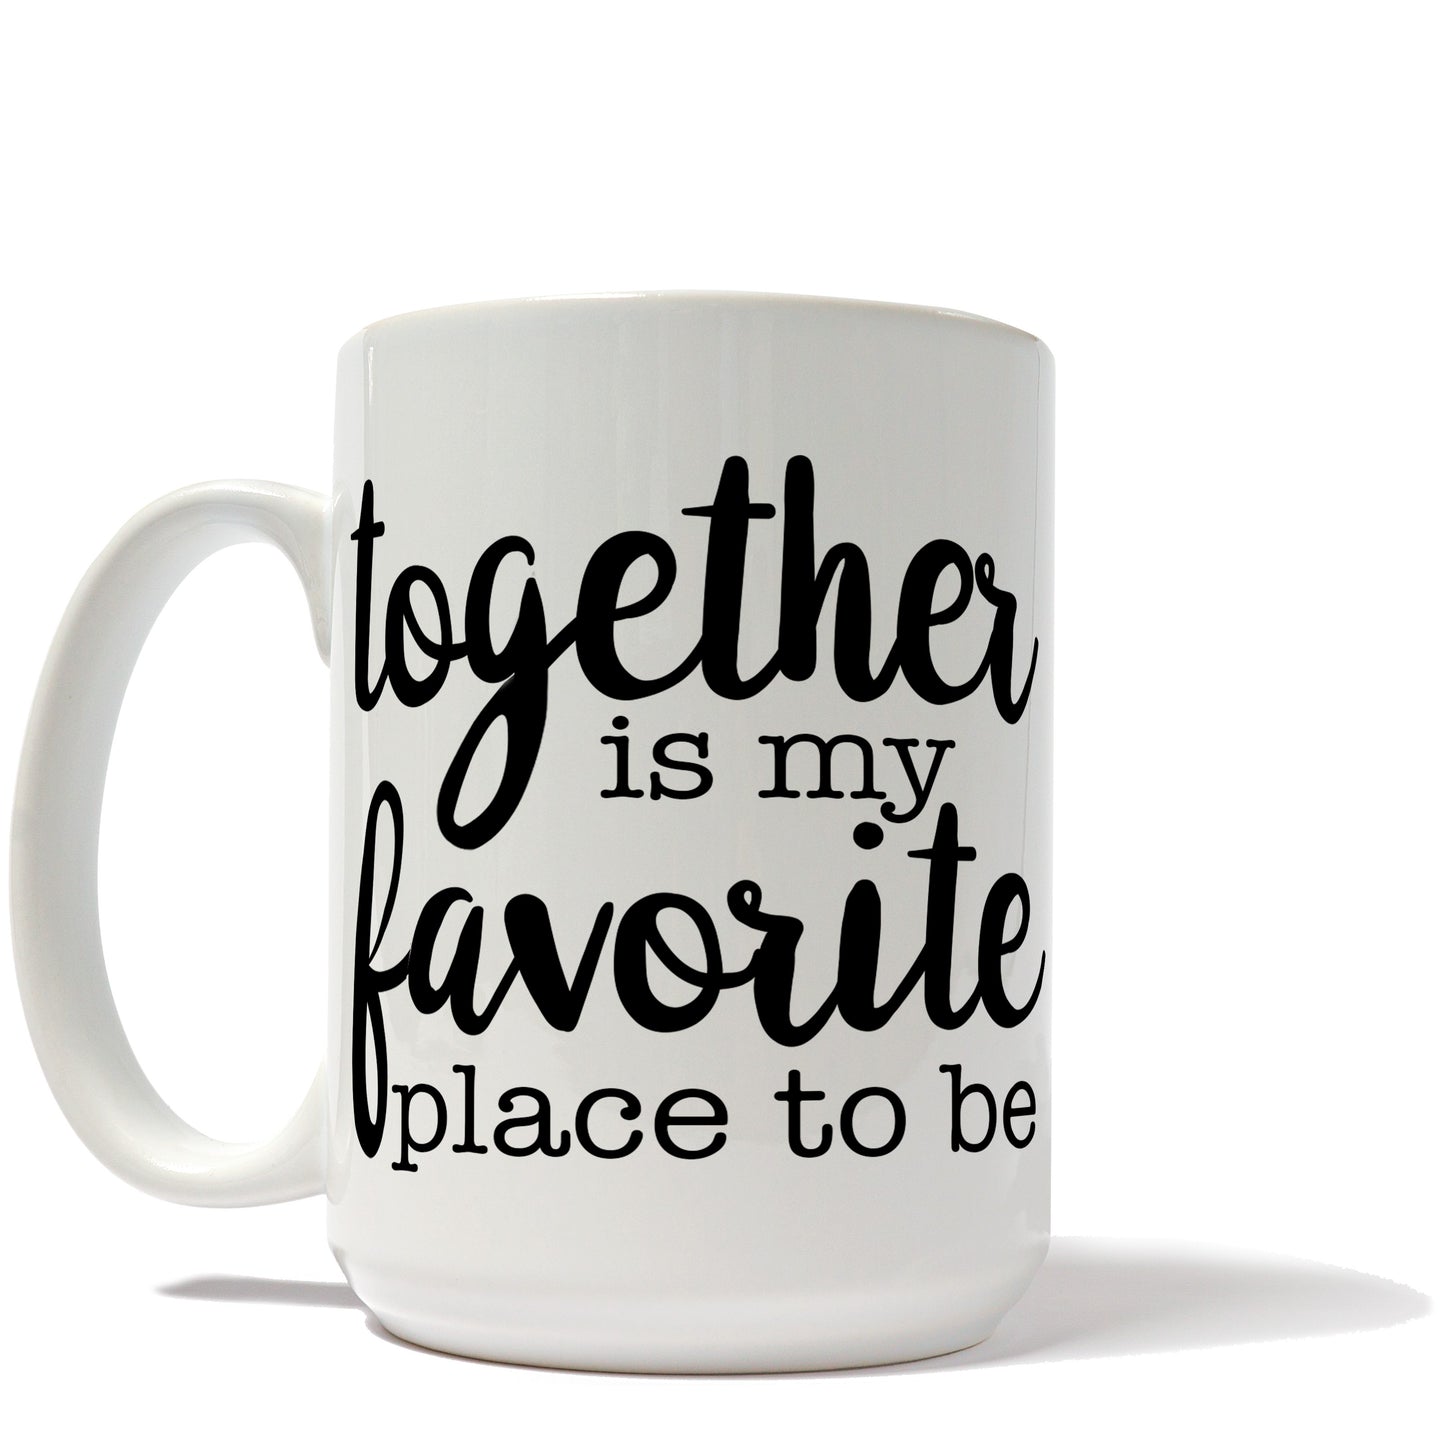 Together Is My Favorite Place to be Mug